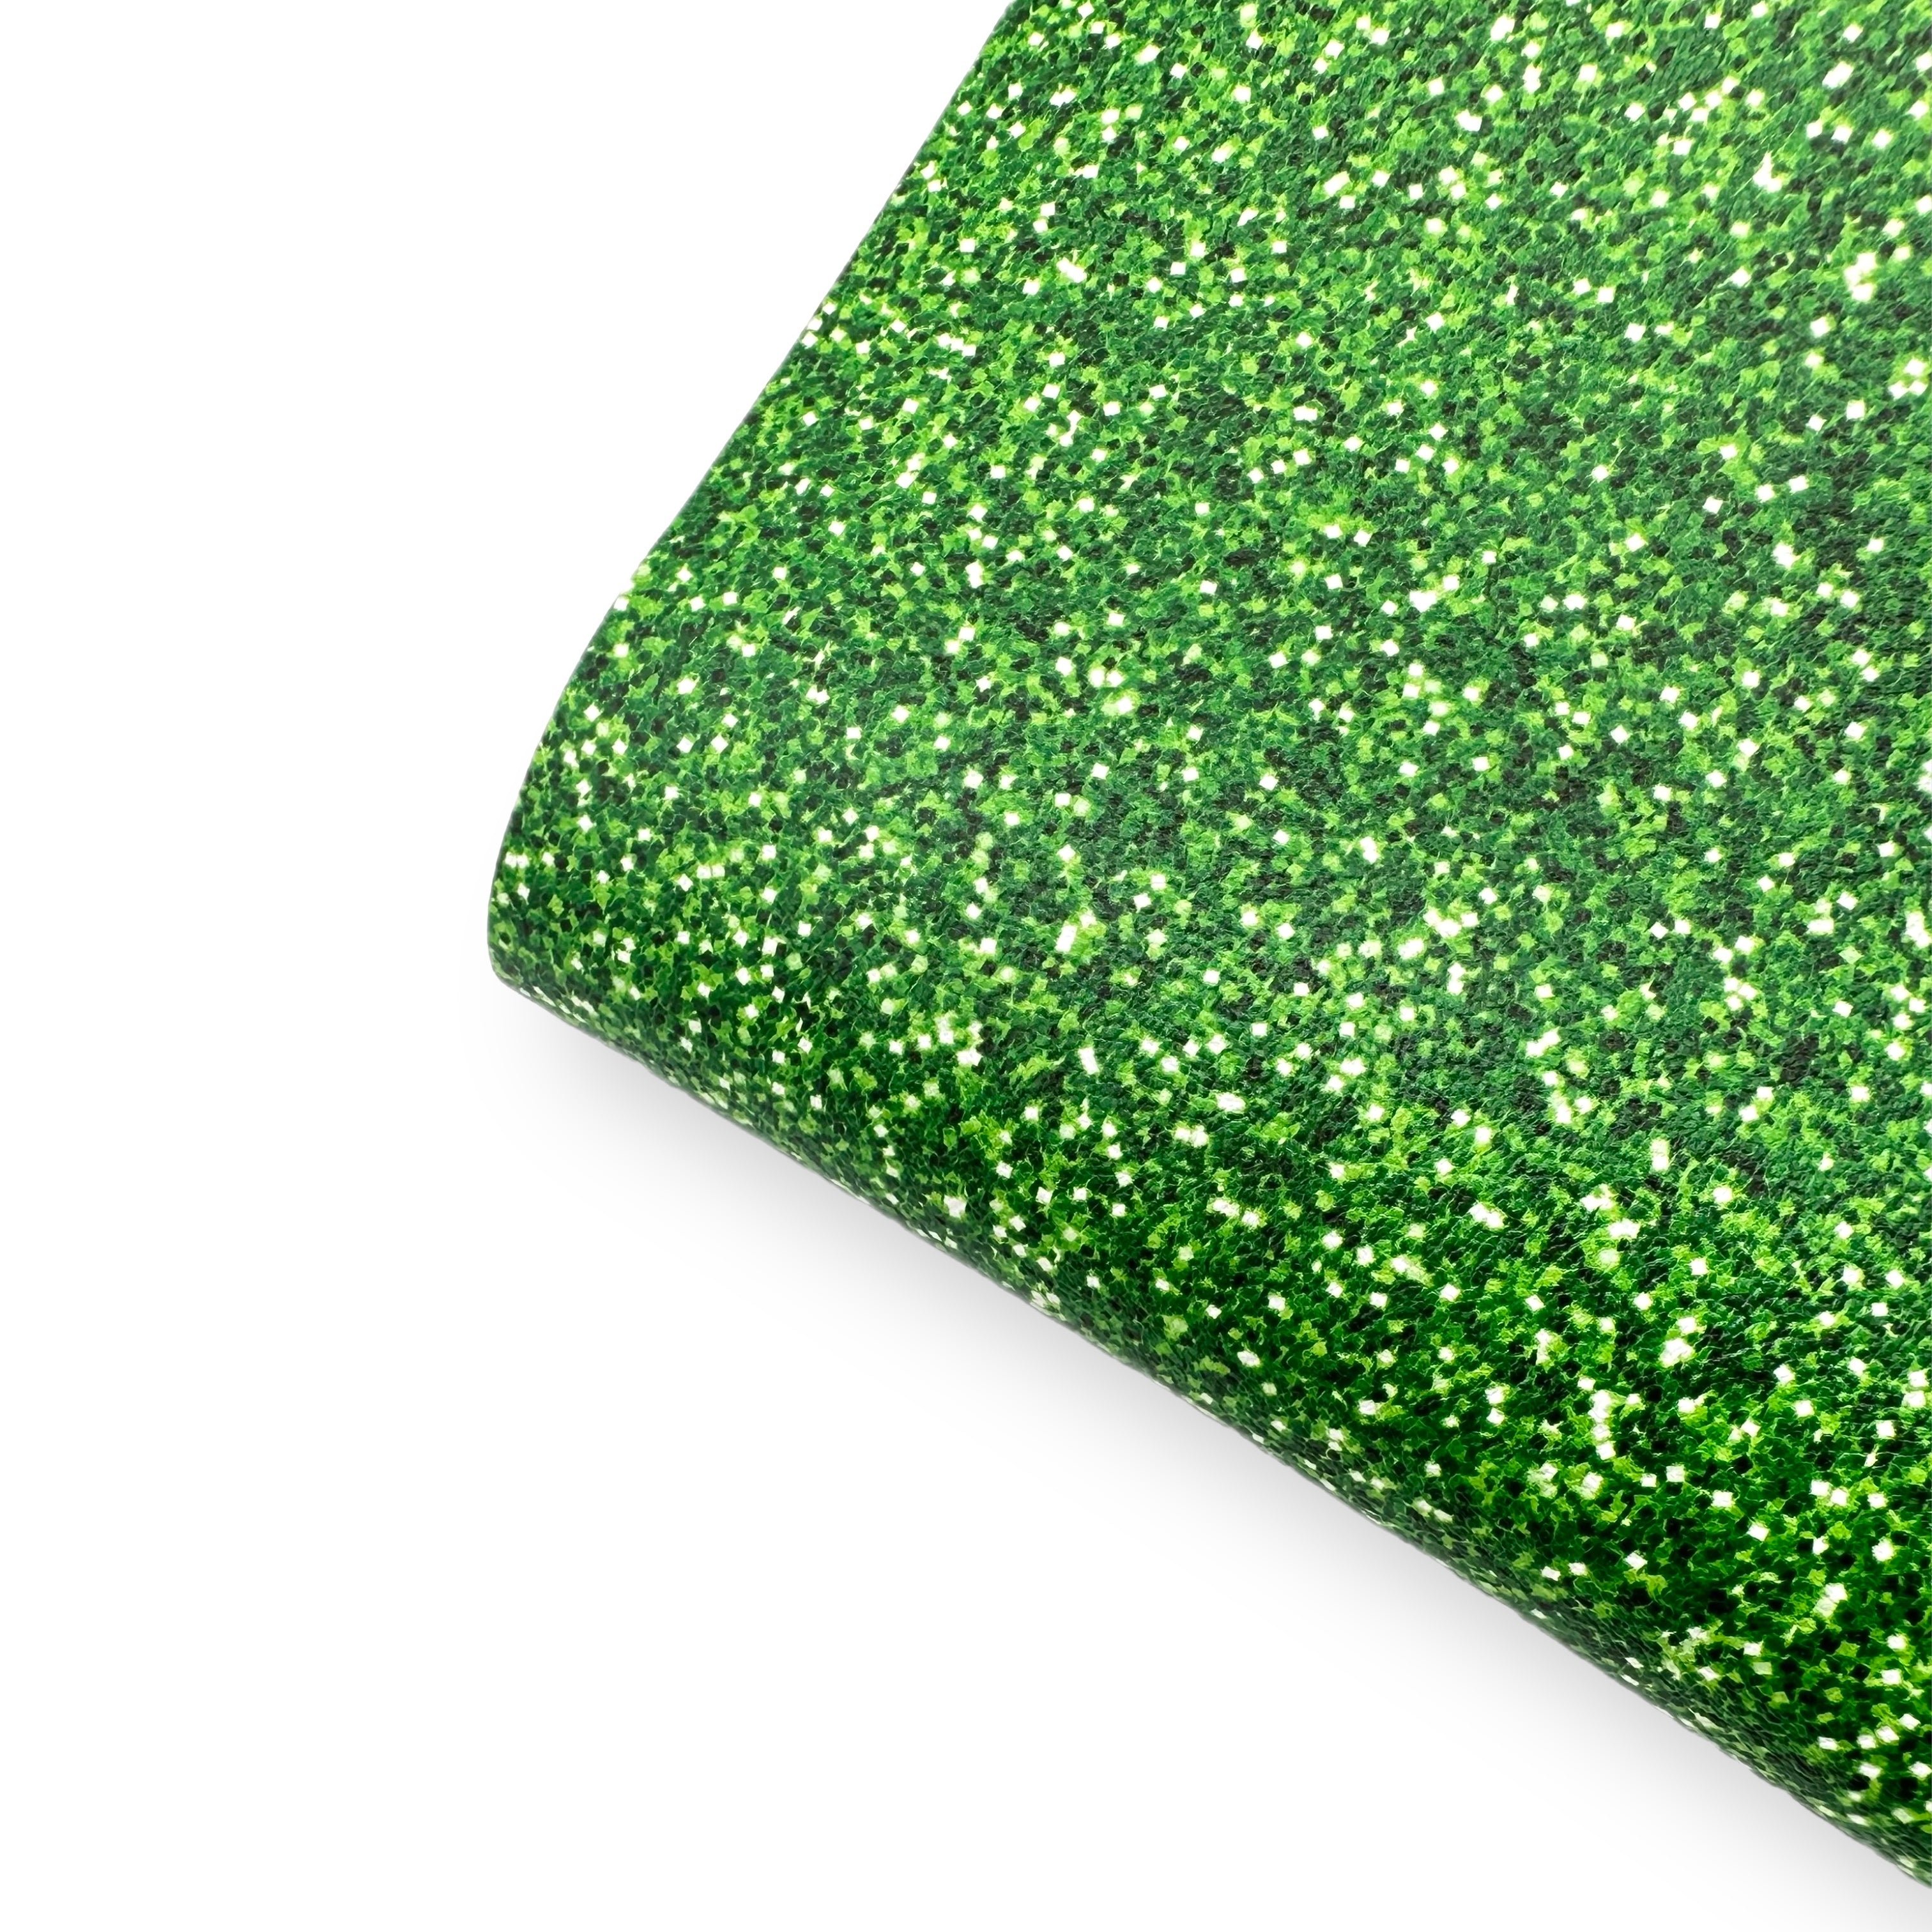 Evergreen Faux Glitter Effect Premium Faux Leather Fabric Sheets